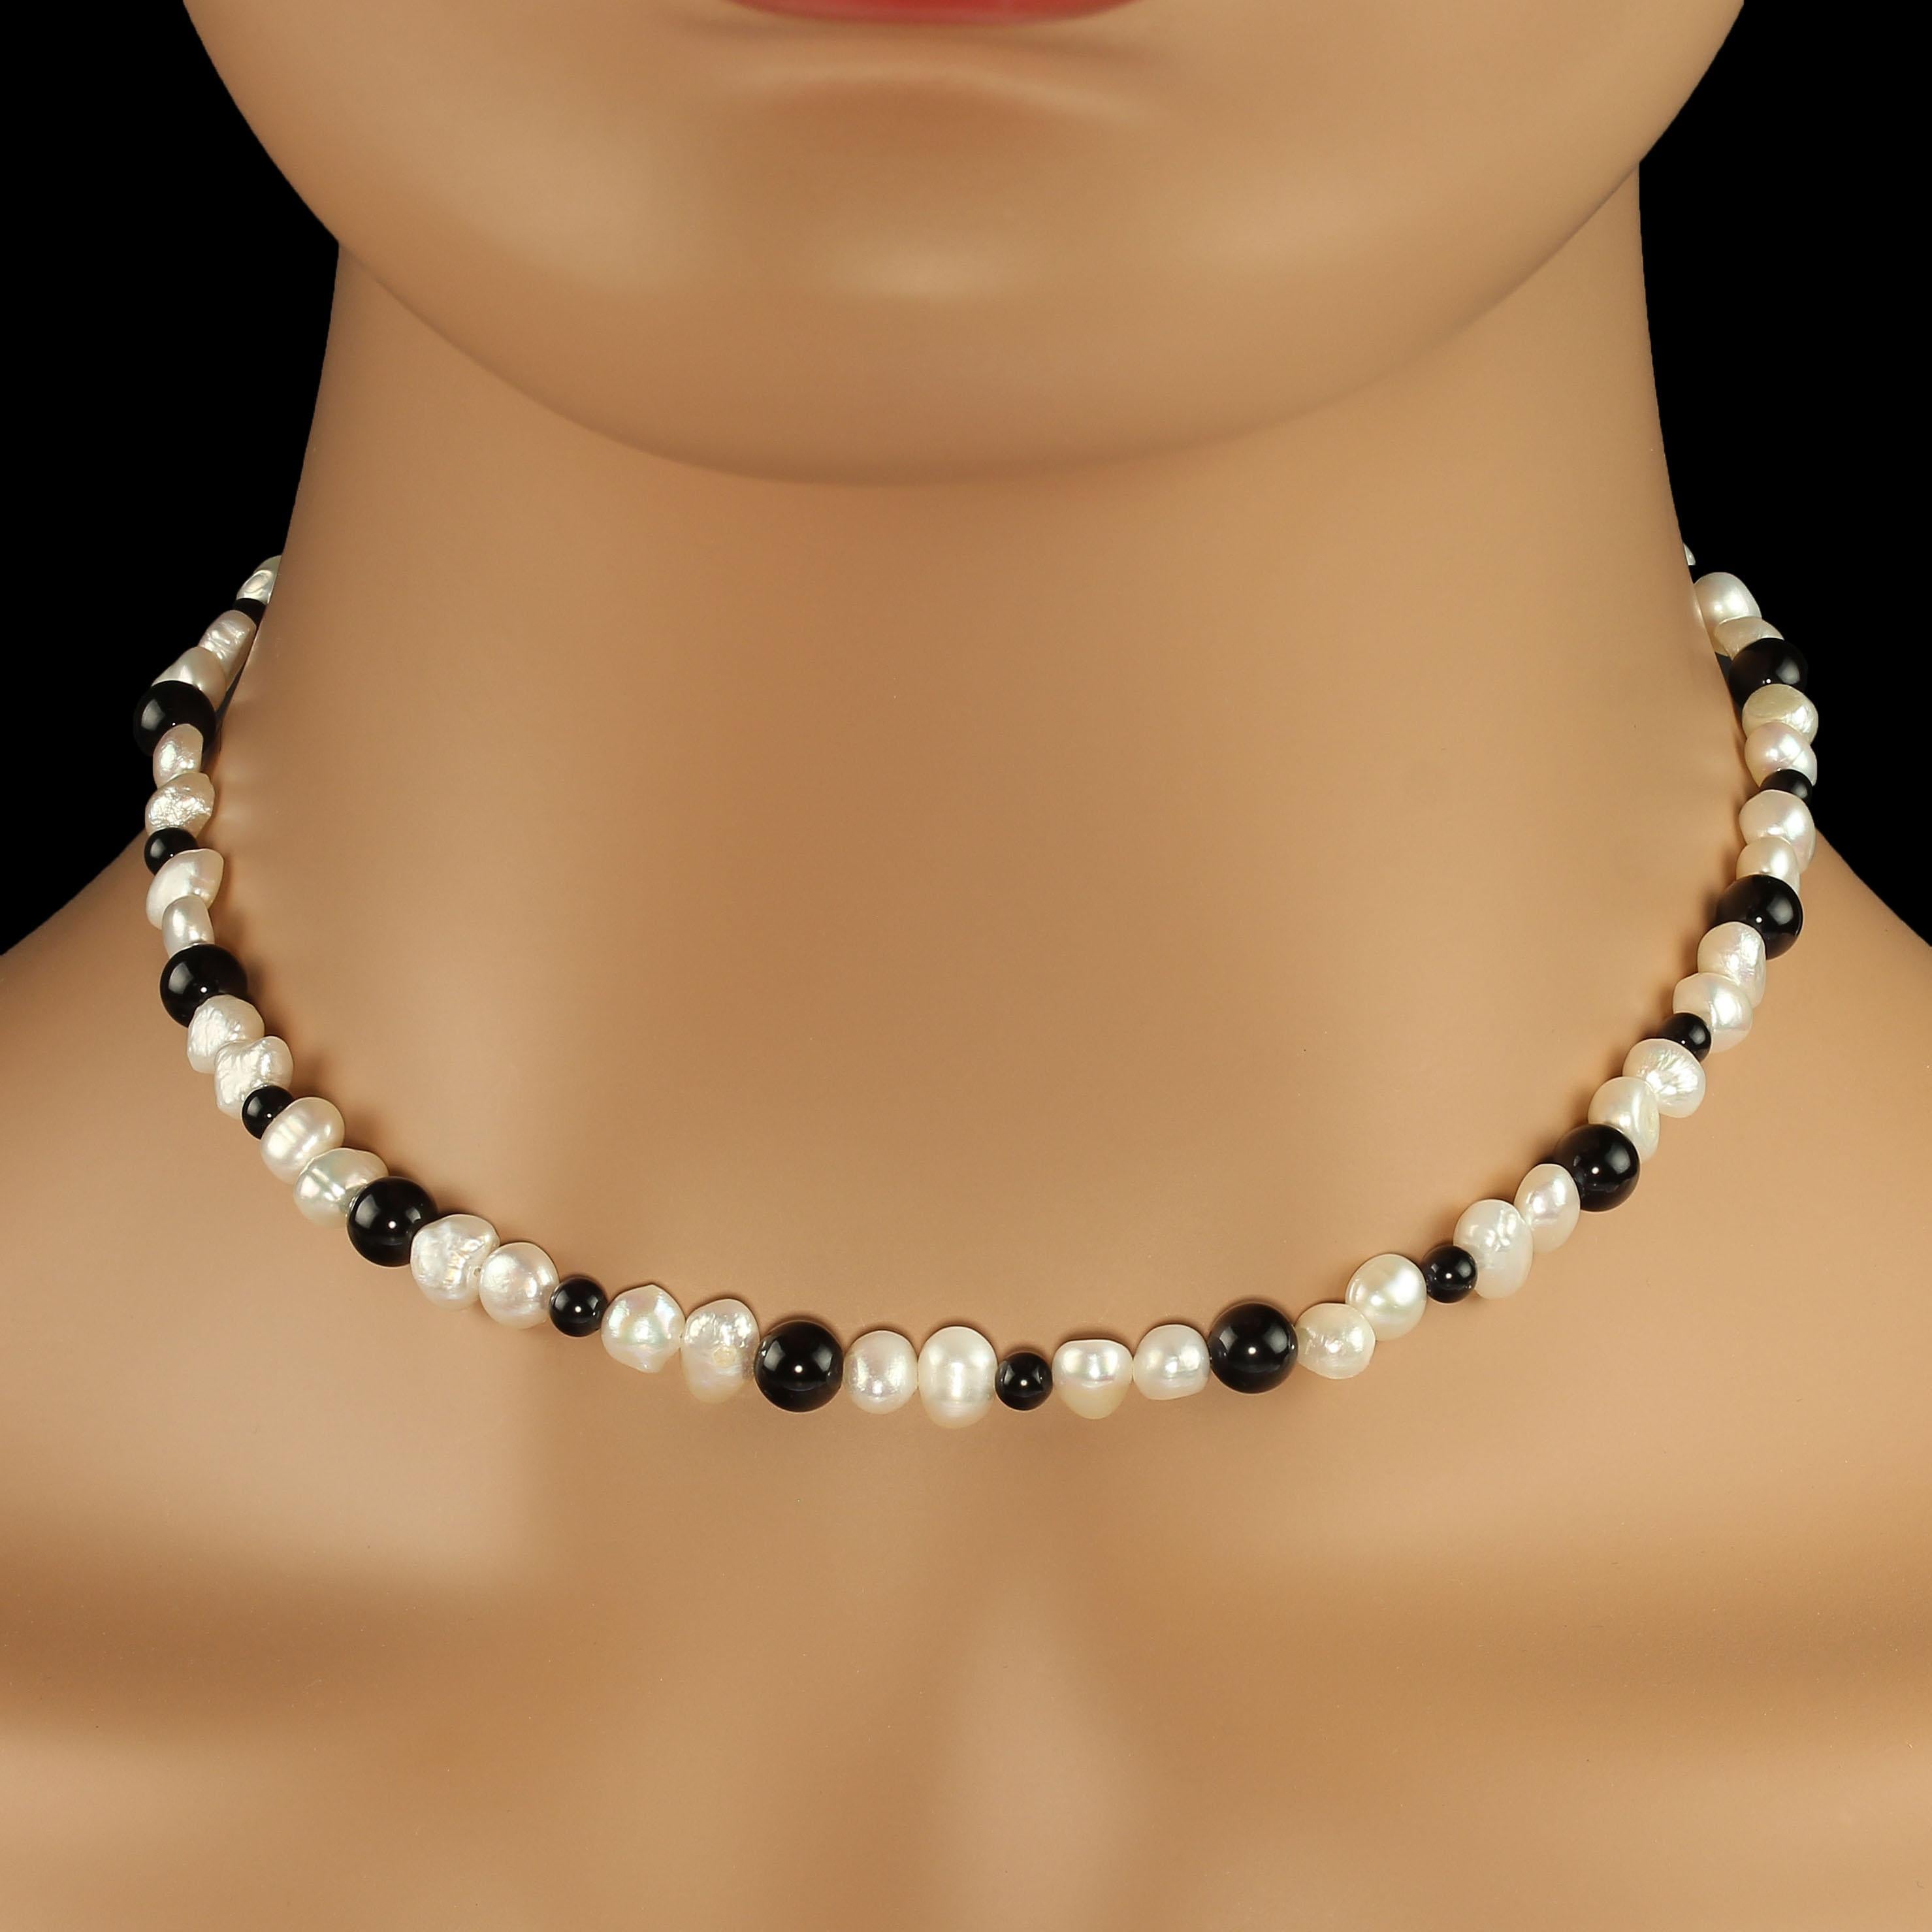 'Put on your Pearls Girls'  Lulu Guinness

Handmade Black and White Choker Necklace of White Freshwater Pearls and Black Onyx in a delicate 15 inch choker length. The lovely iridescent free form Freshwater pearls are mostly roundish and contrast